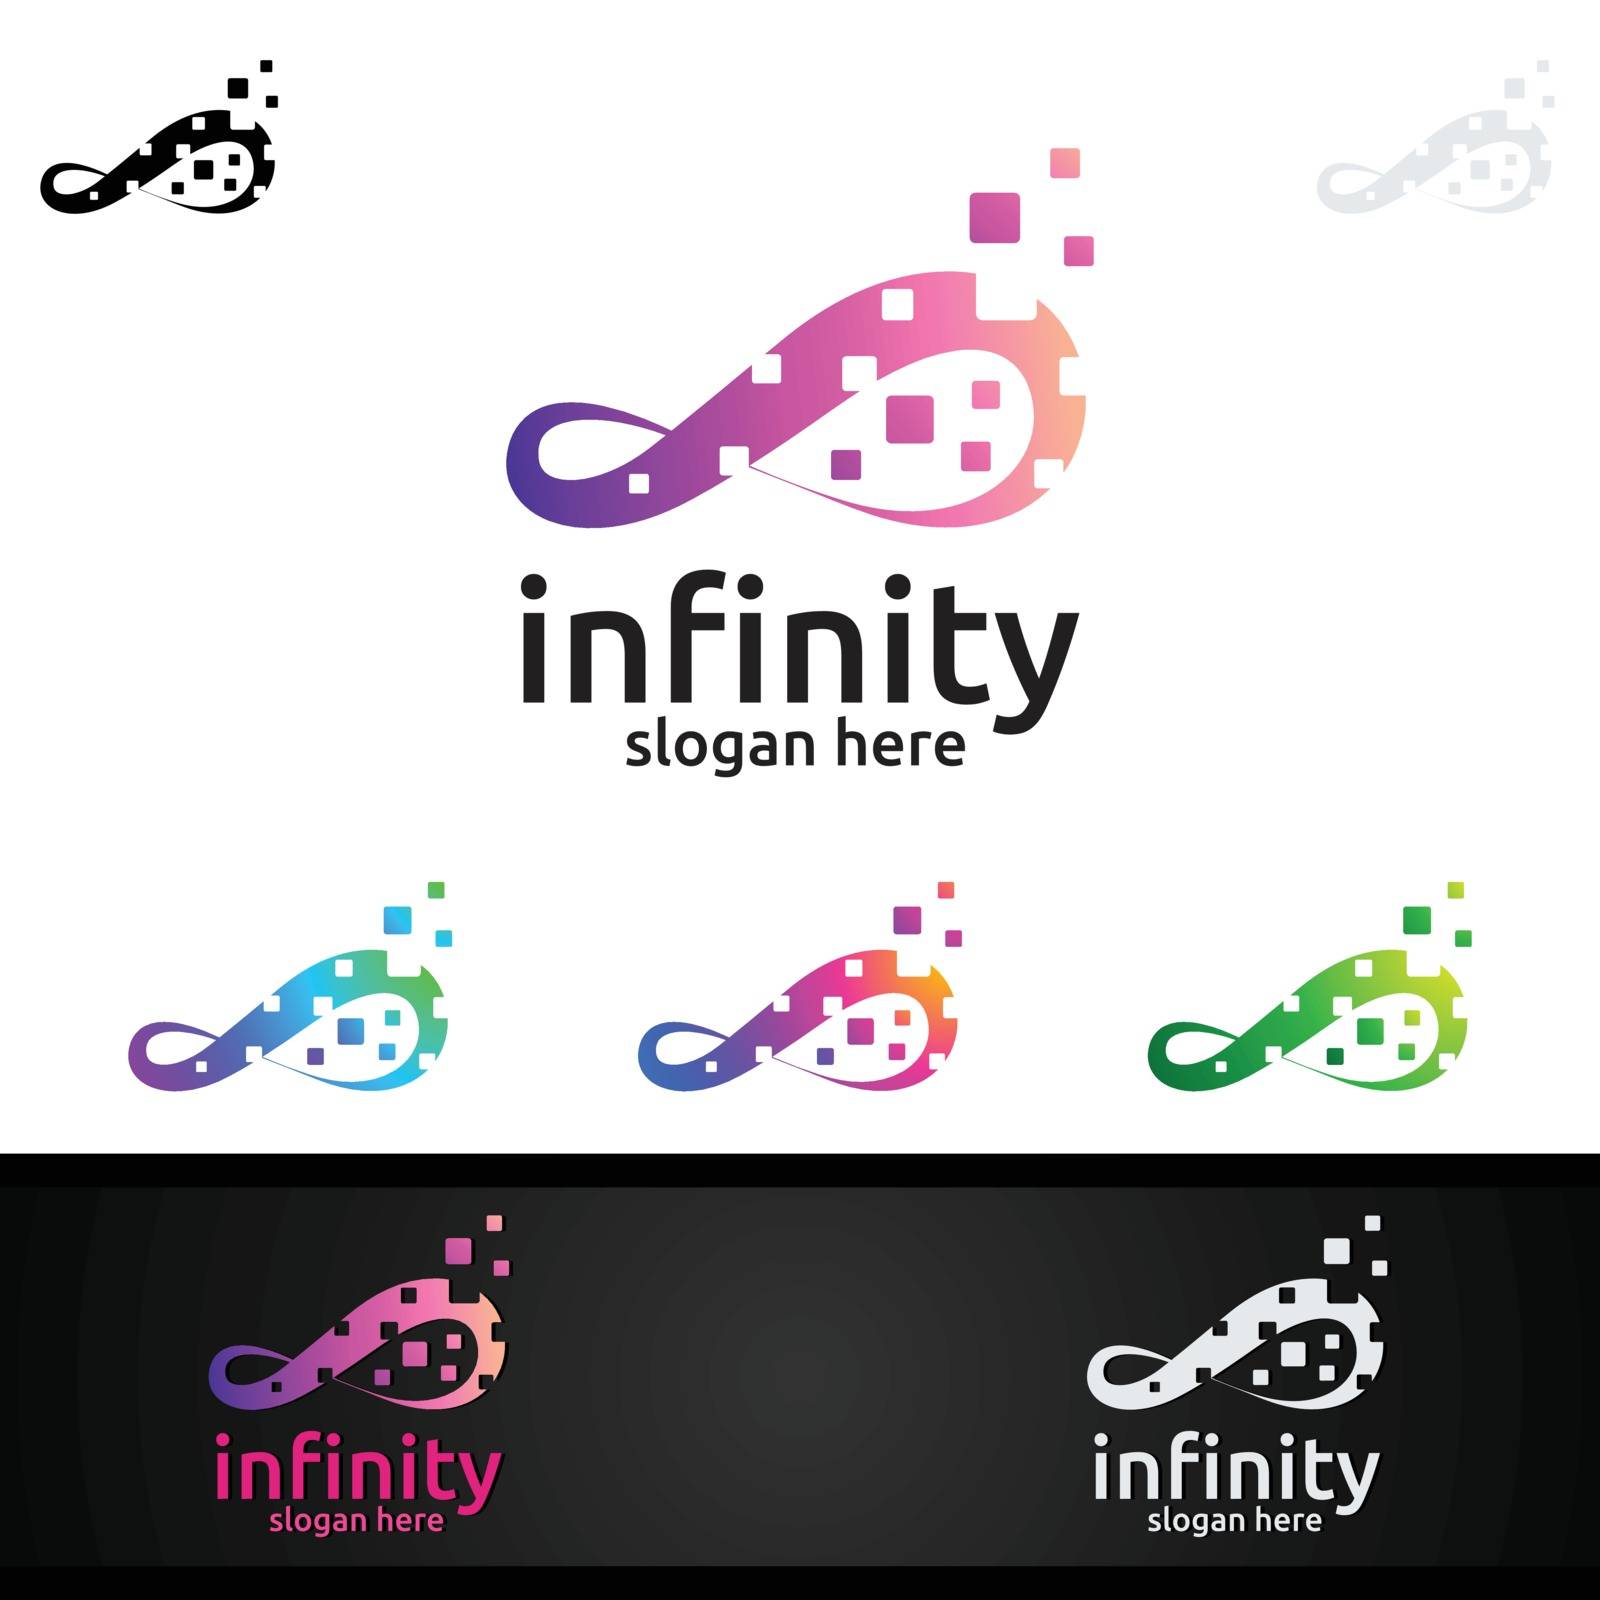 Infinity loop logo icon. Vector unlimited infinity, endless line shape sign